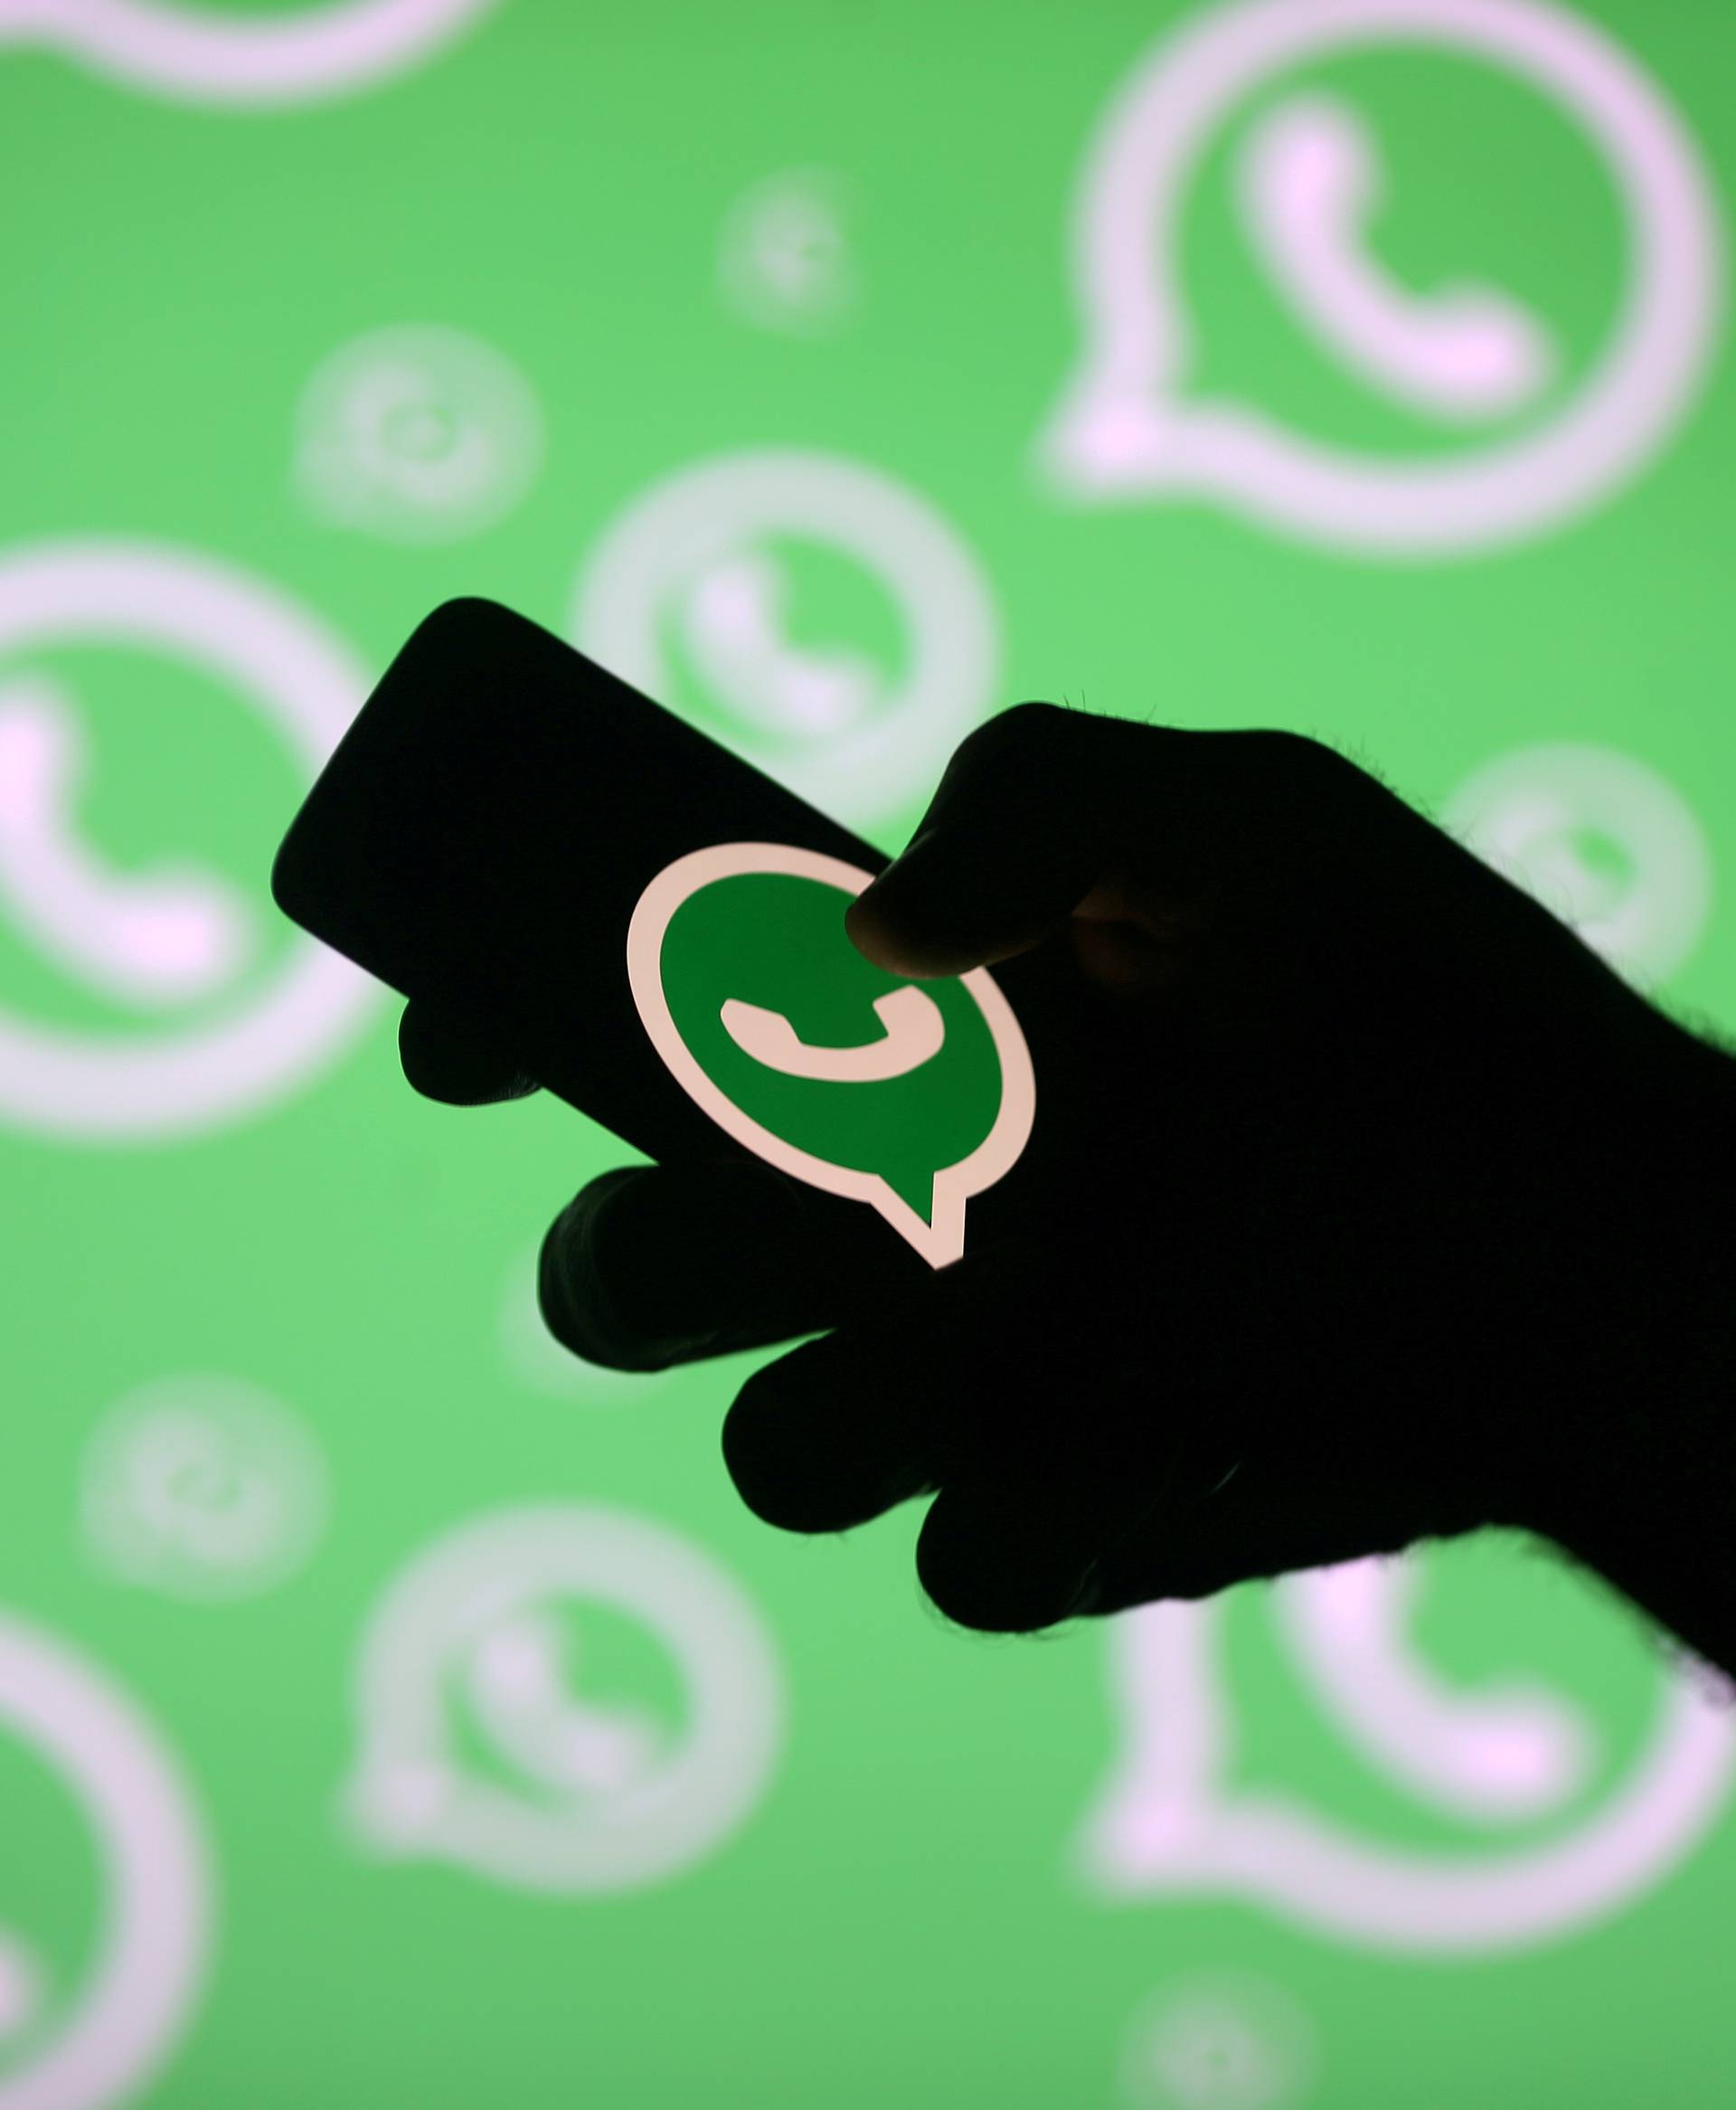 FILE PHOTO: A man poses with a smartphone in front of displayed Whatsapp logo in this illustration